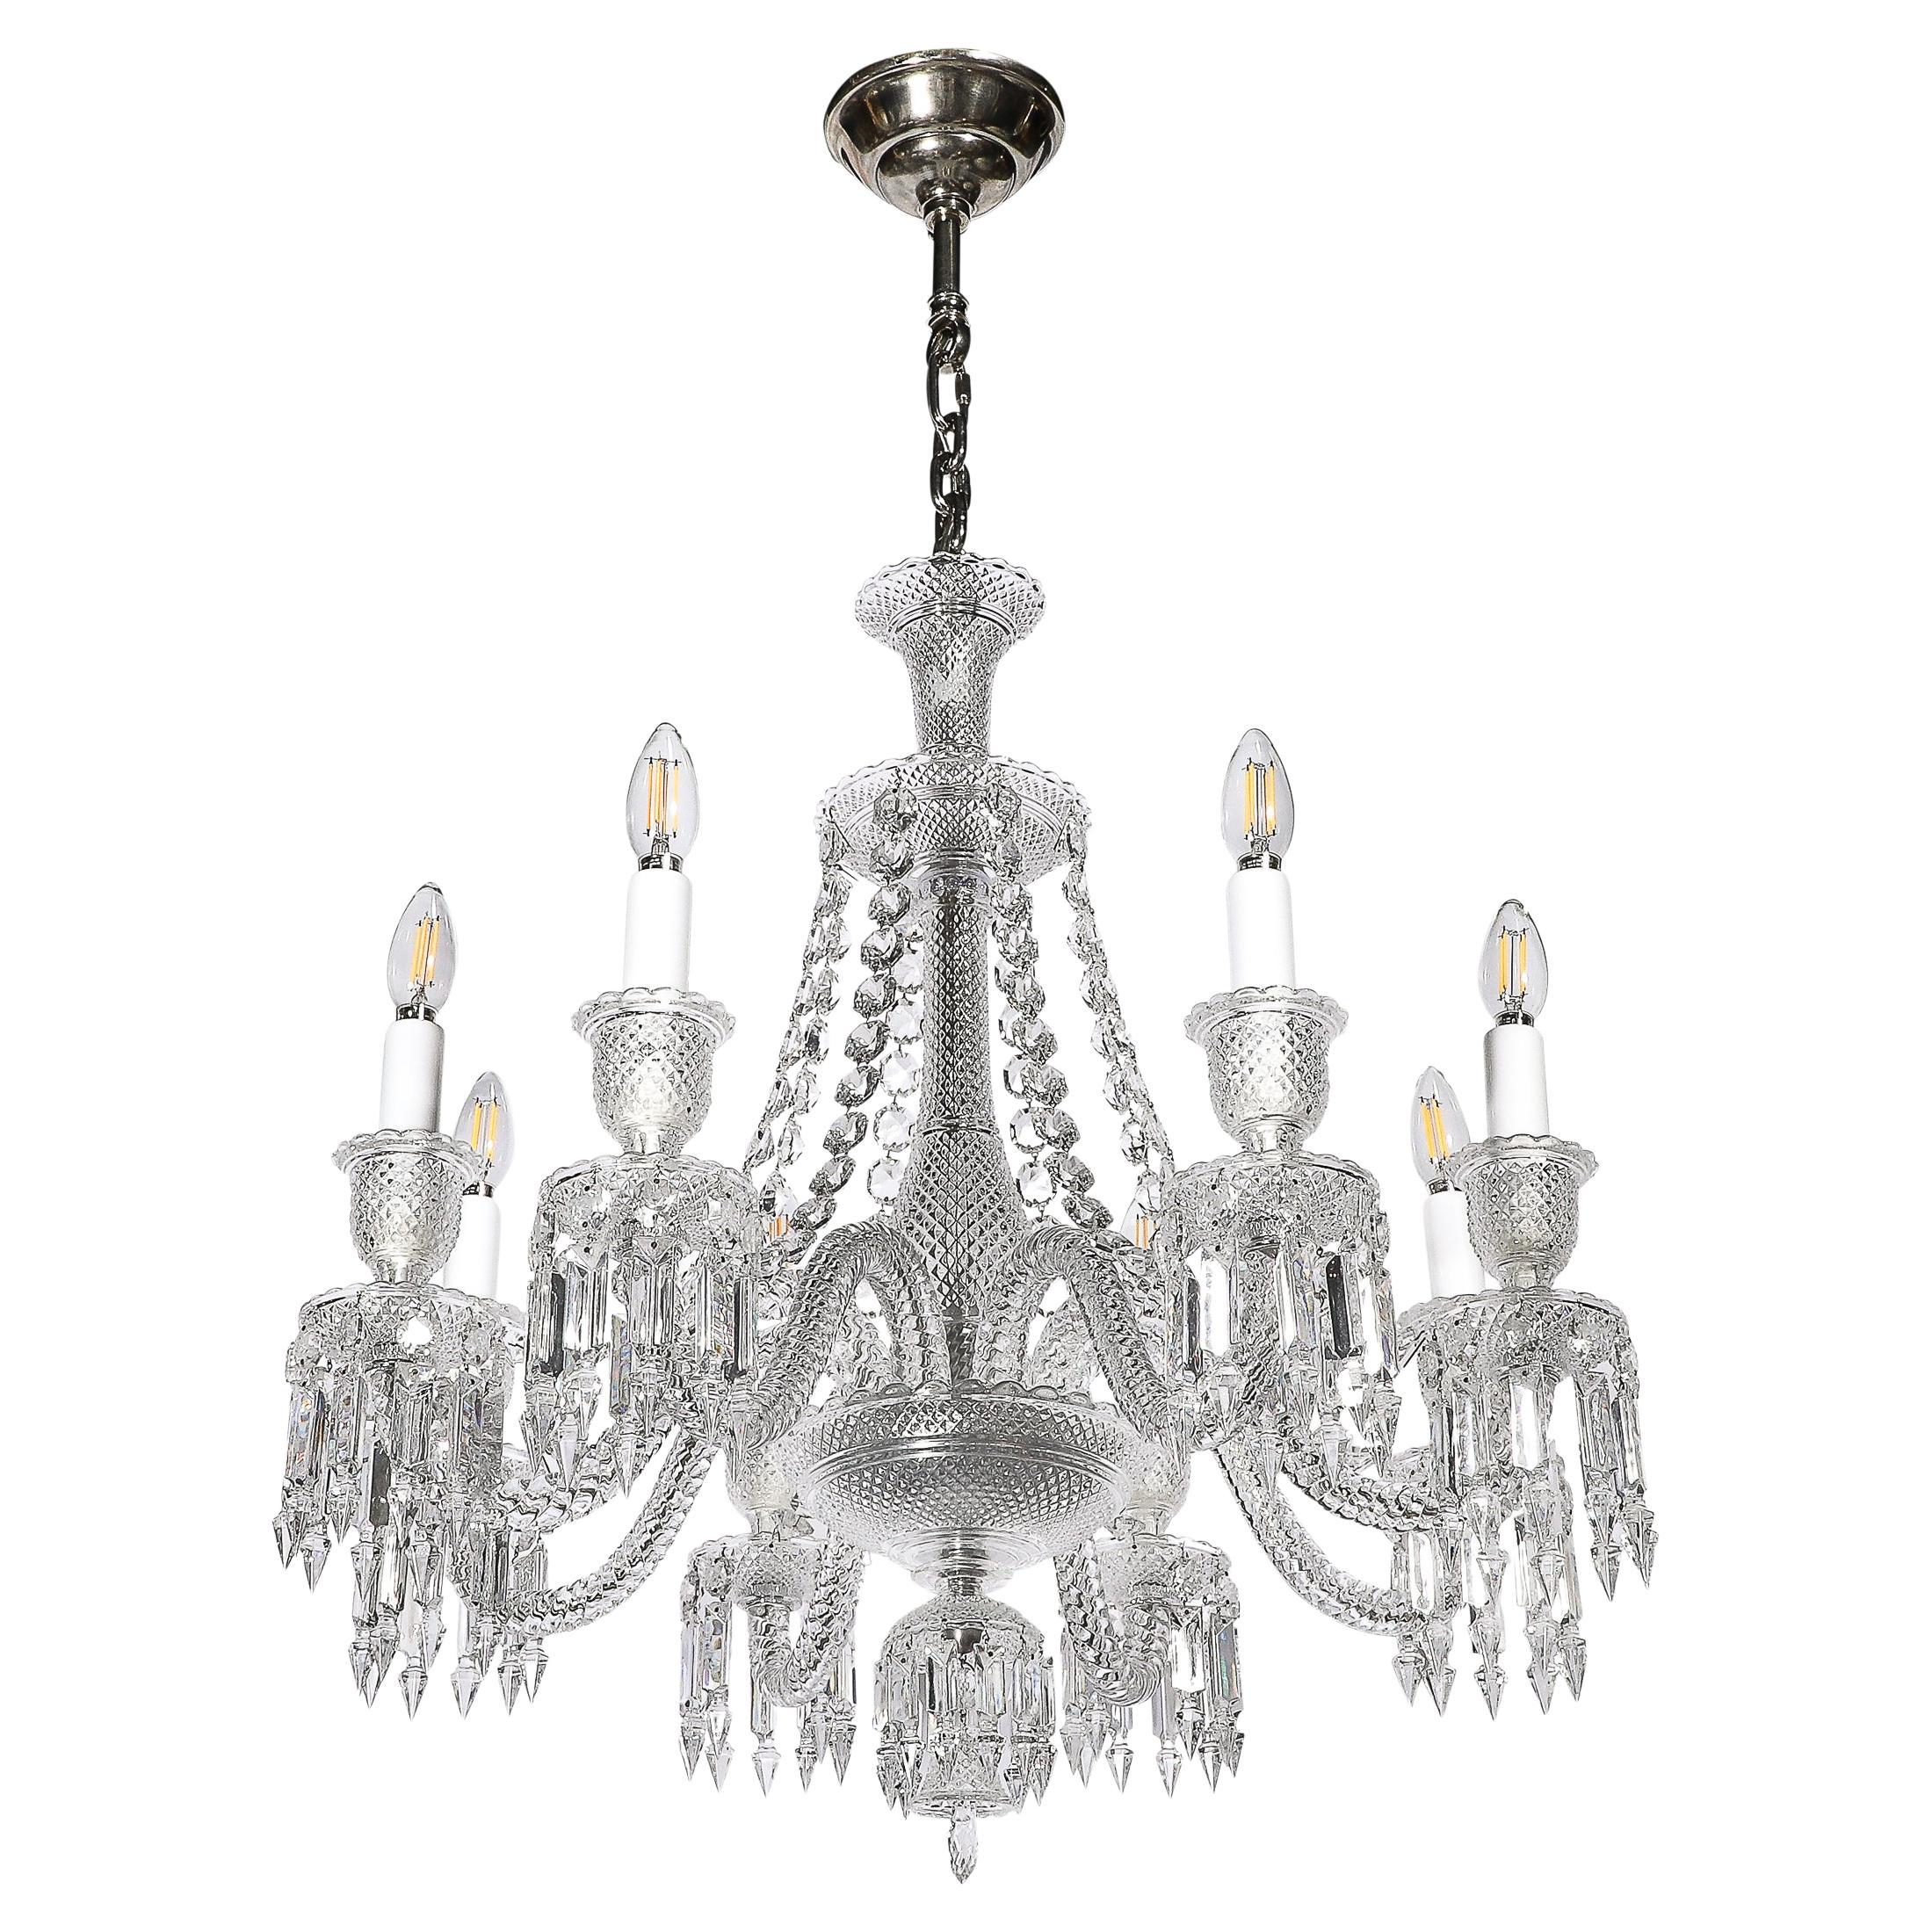 How can I spot an authentic Baccarat chandelier?